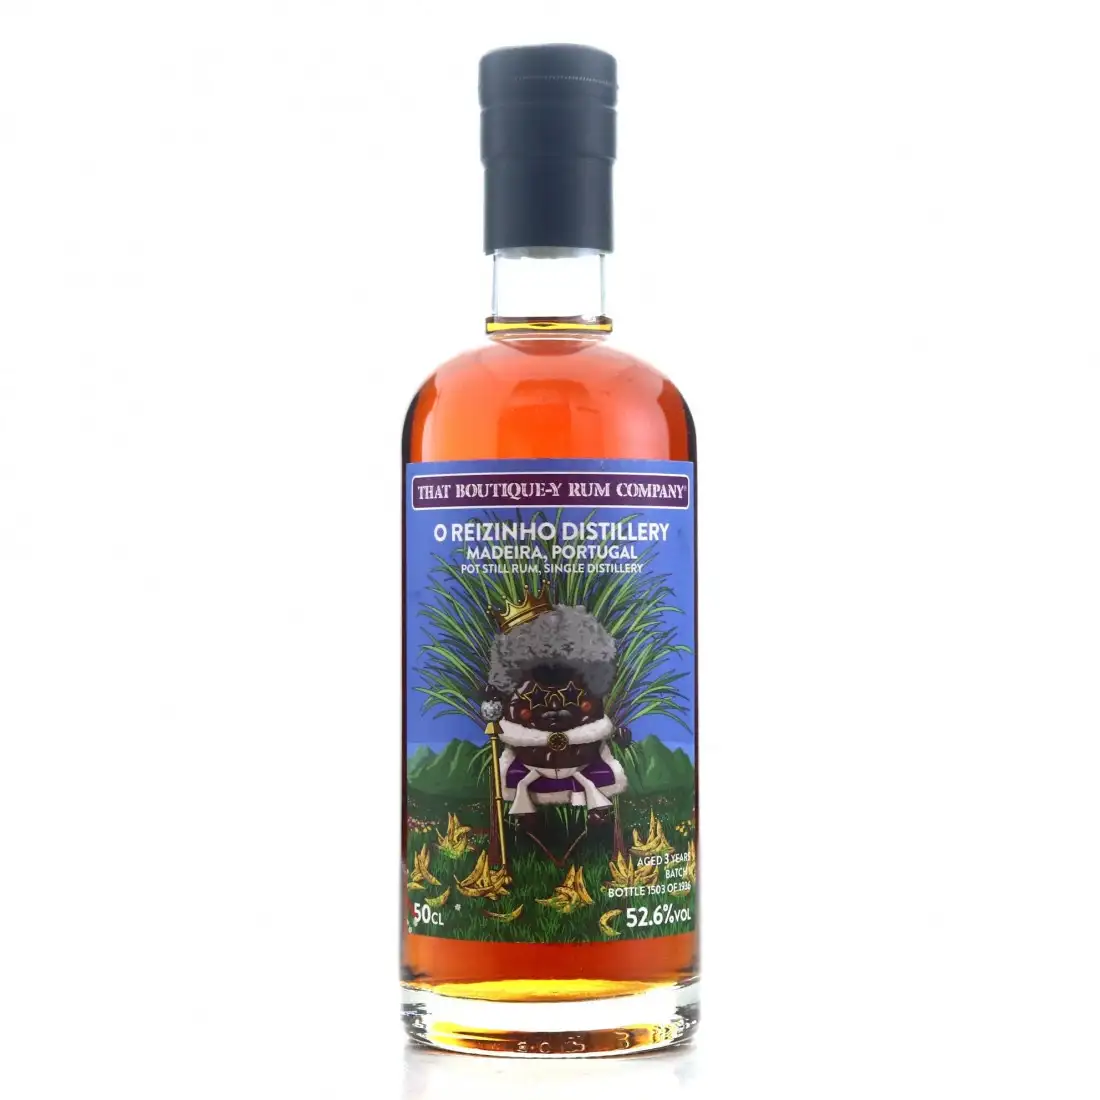 Image of the front of the bottle of the rum None